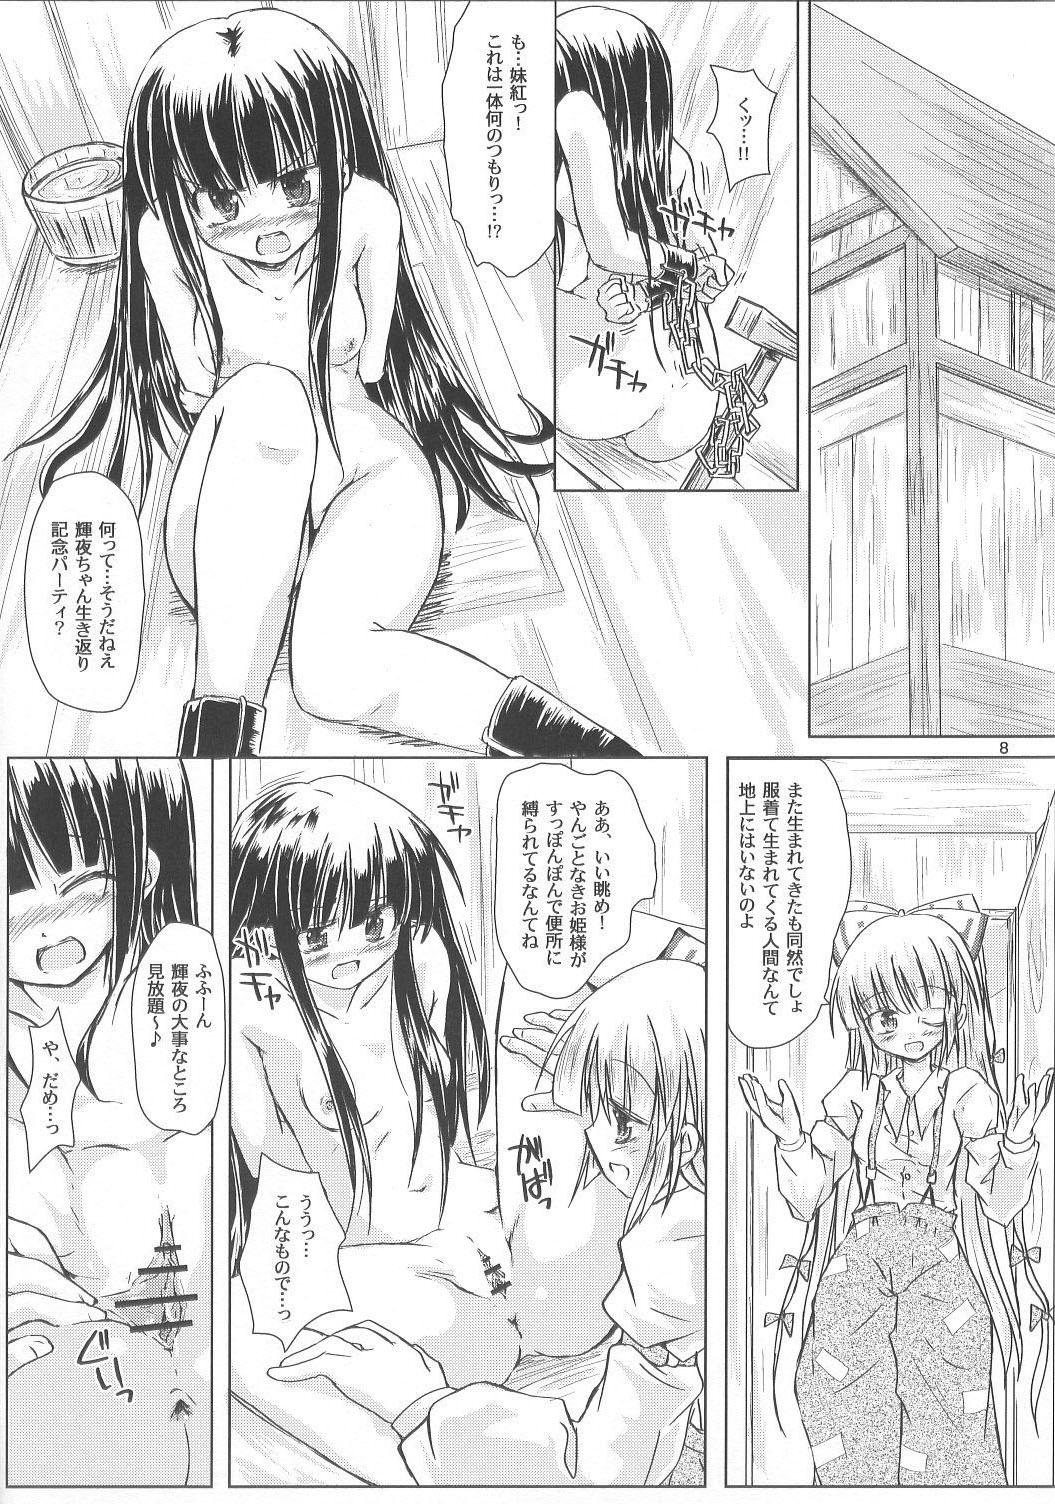 Jerking Off Hourai Geppei - Touhou project Dominatrix - Page 7